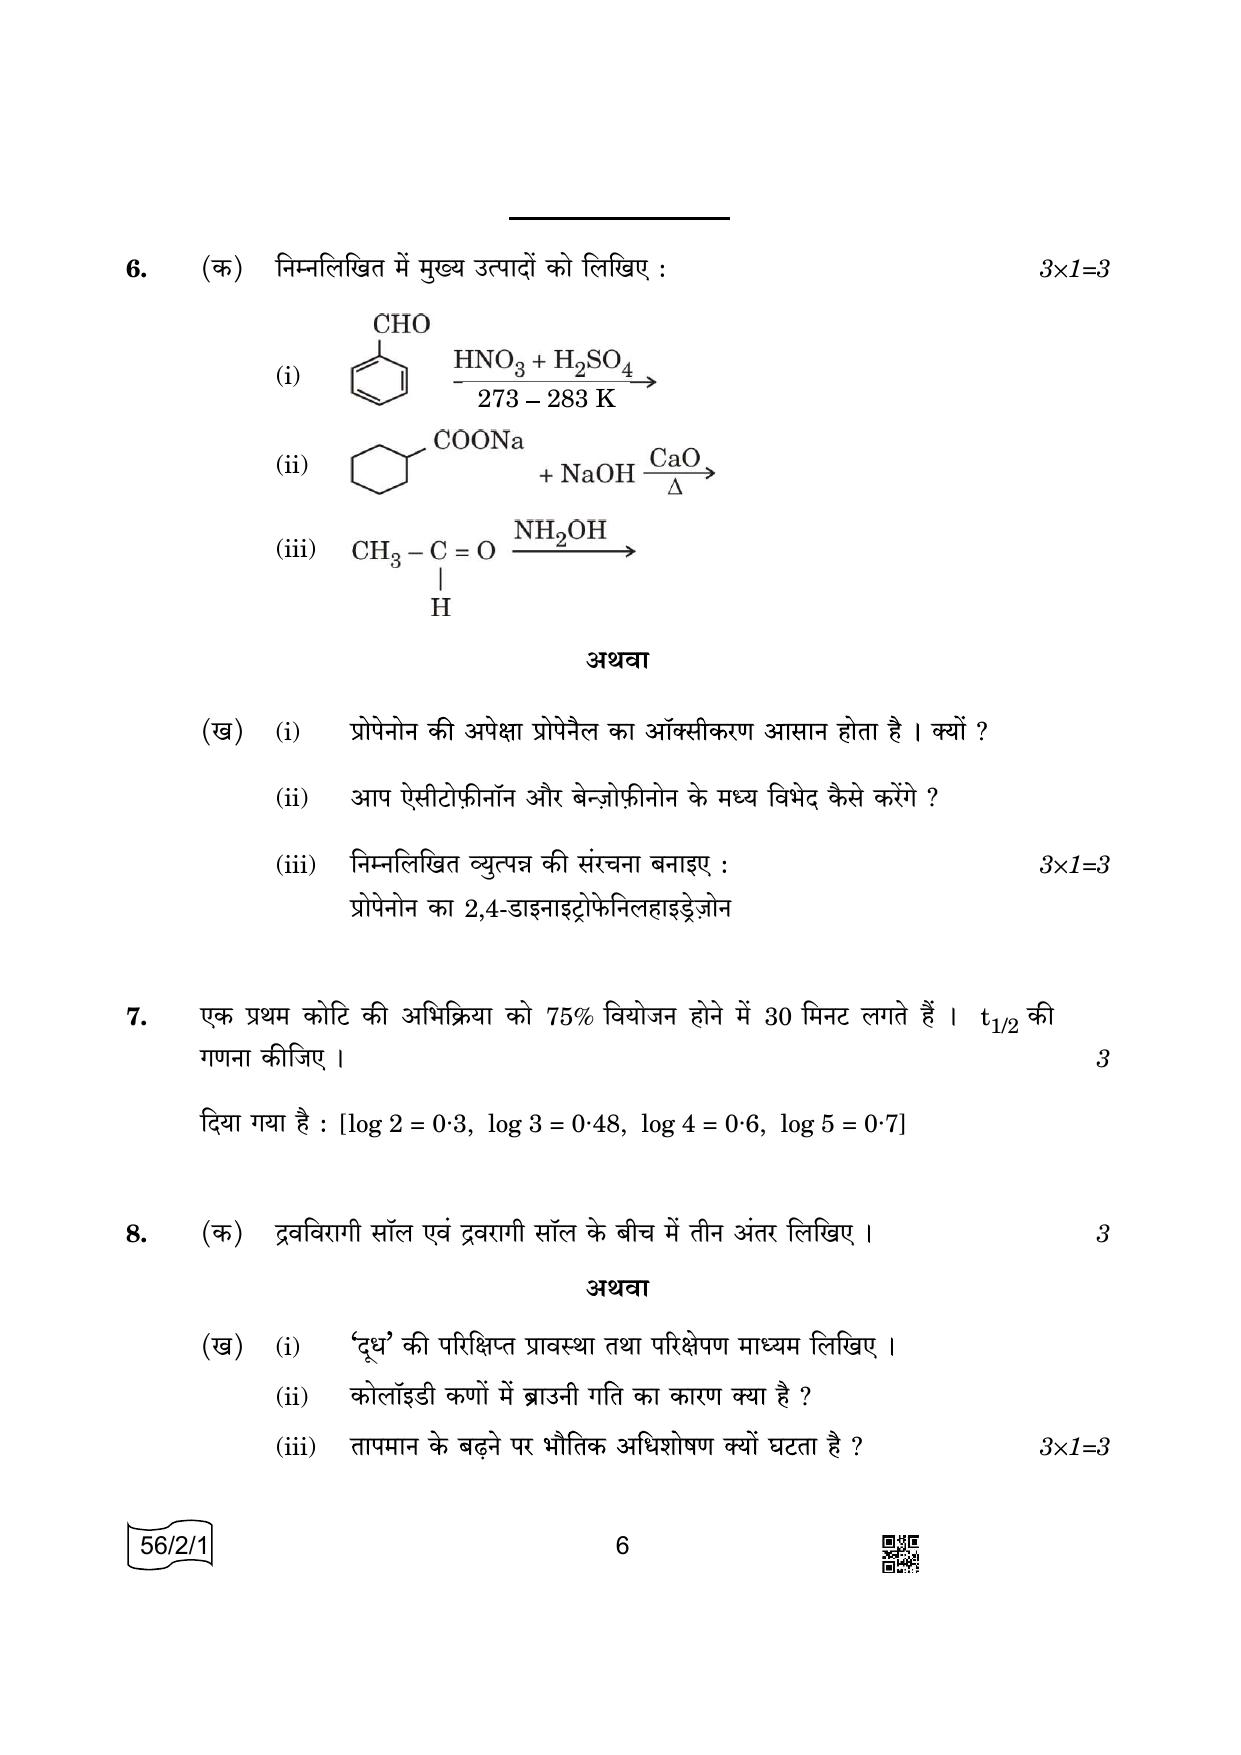 CBSE Class 12 56-2-1 Chemistry 2022 Question Paper - Page 6